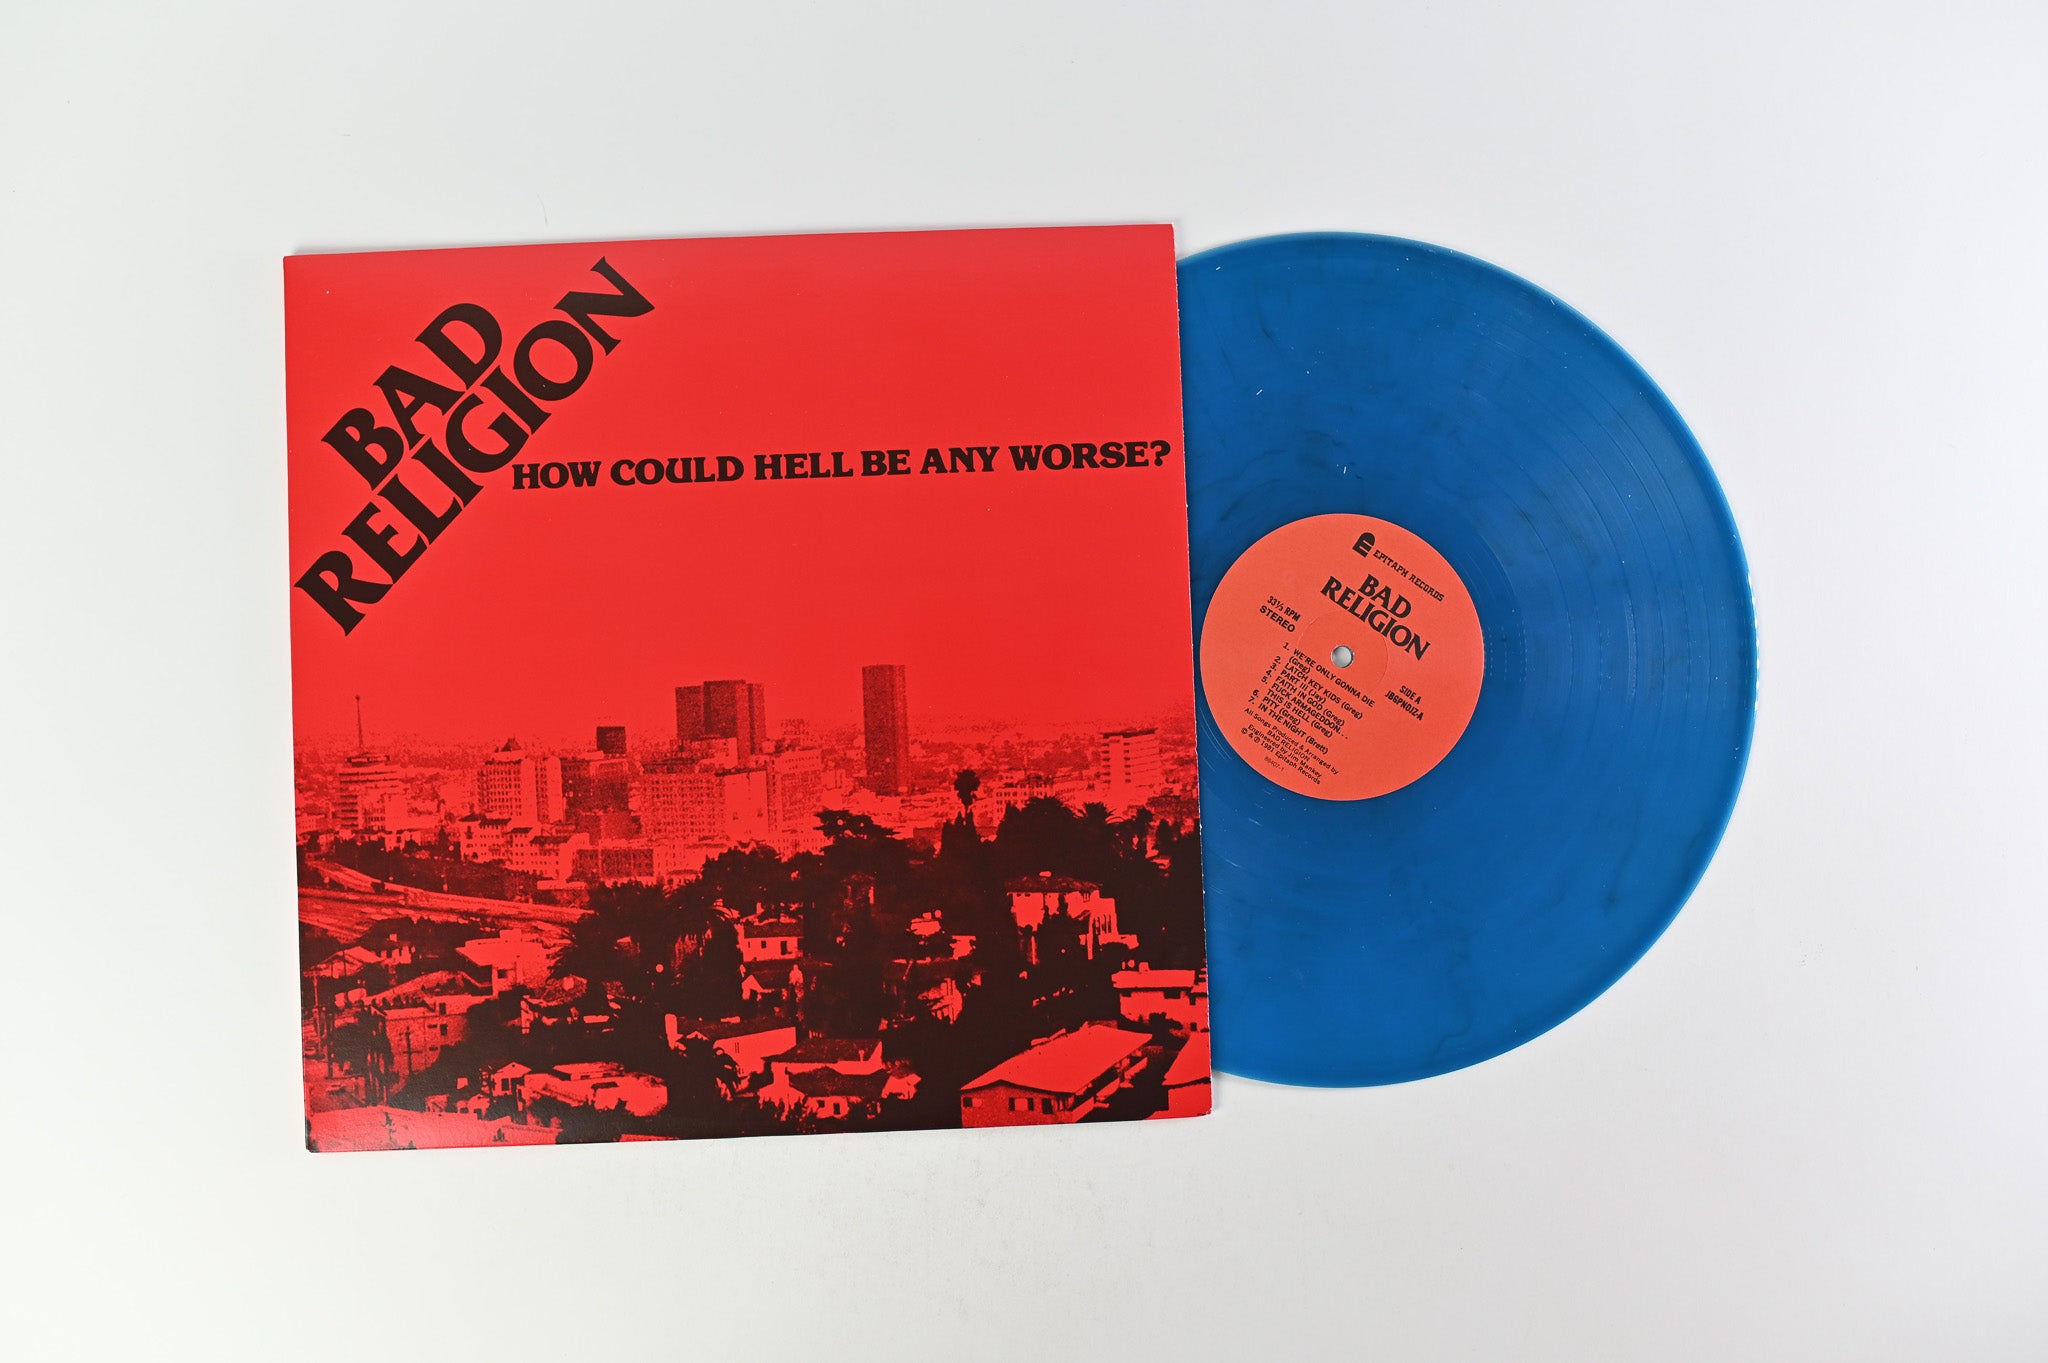 Bad Religion - How Could Hell Be Any Worse? on Epitaph Ltd Blue With Black Transparent Reissue